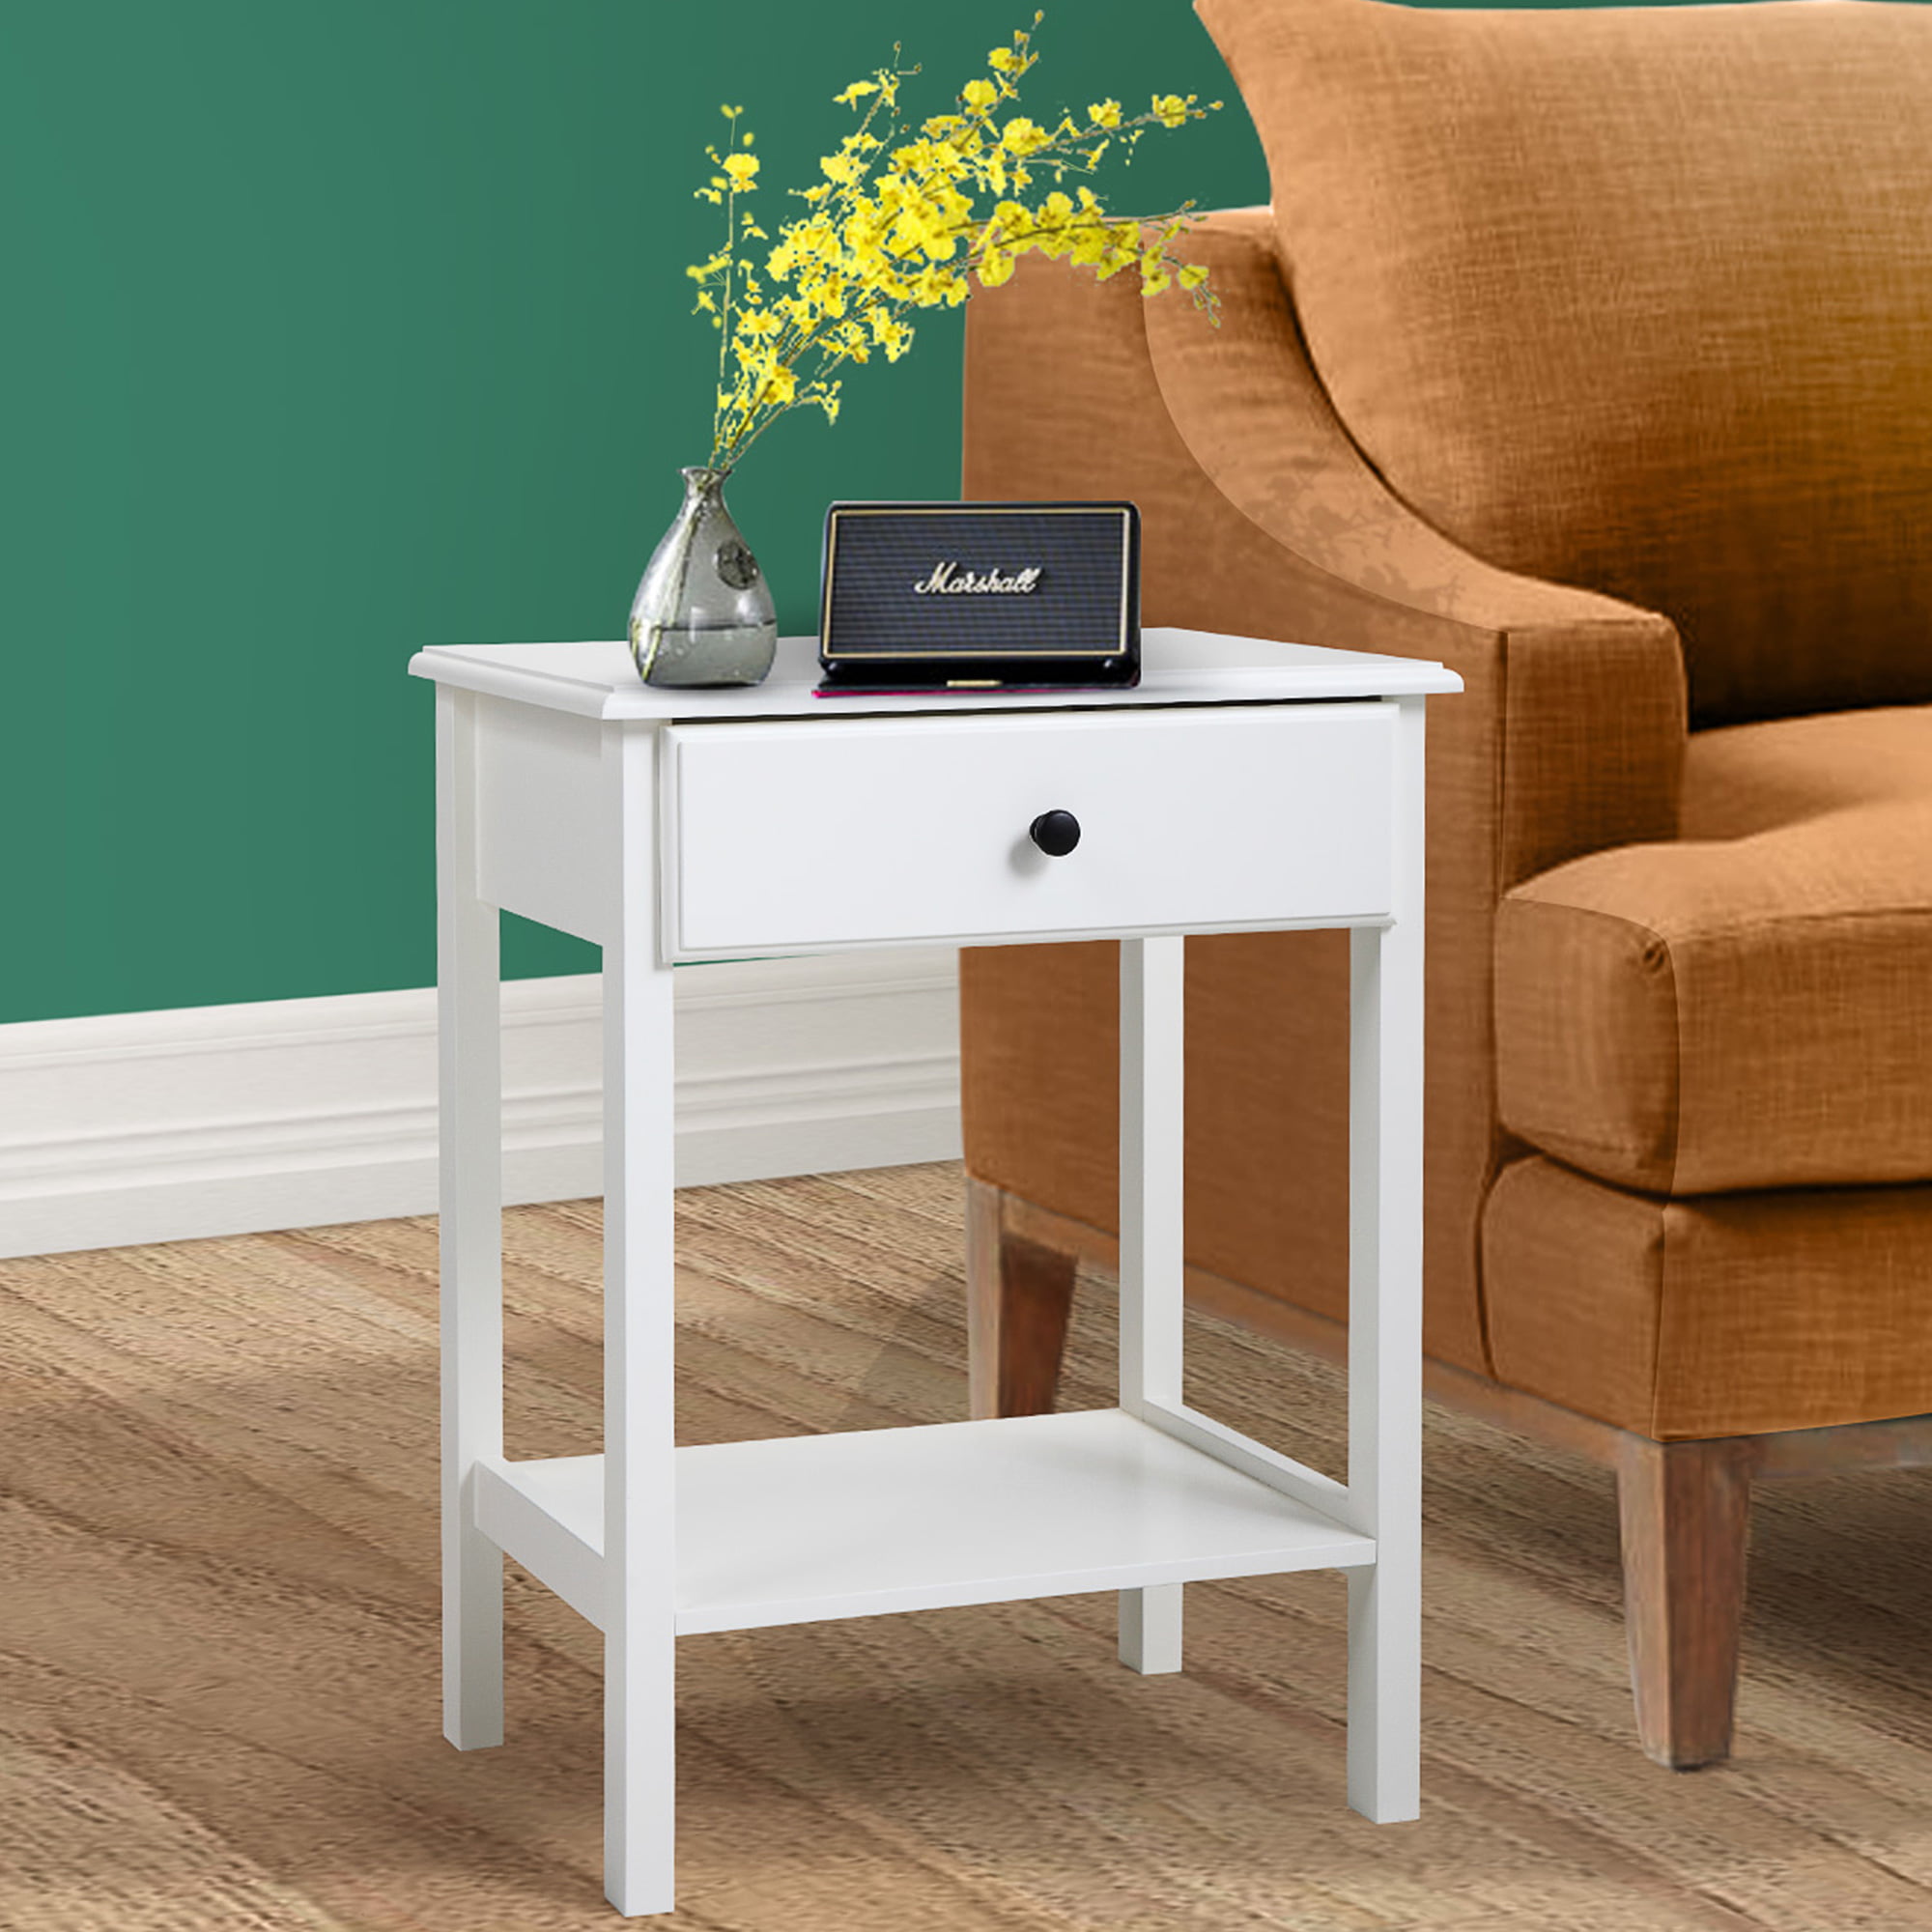 Jaxpety End Table with Drawer Storage Shelf Nightstand Bedside Accent